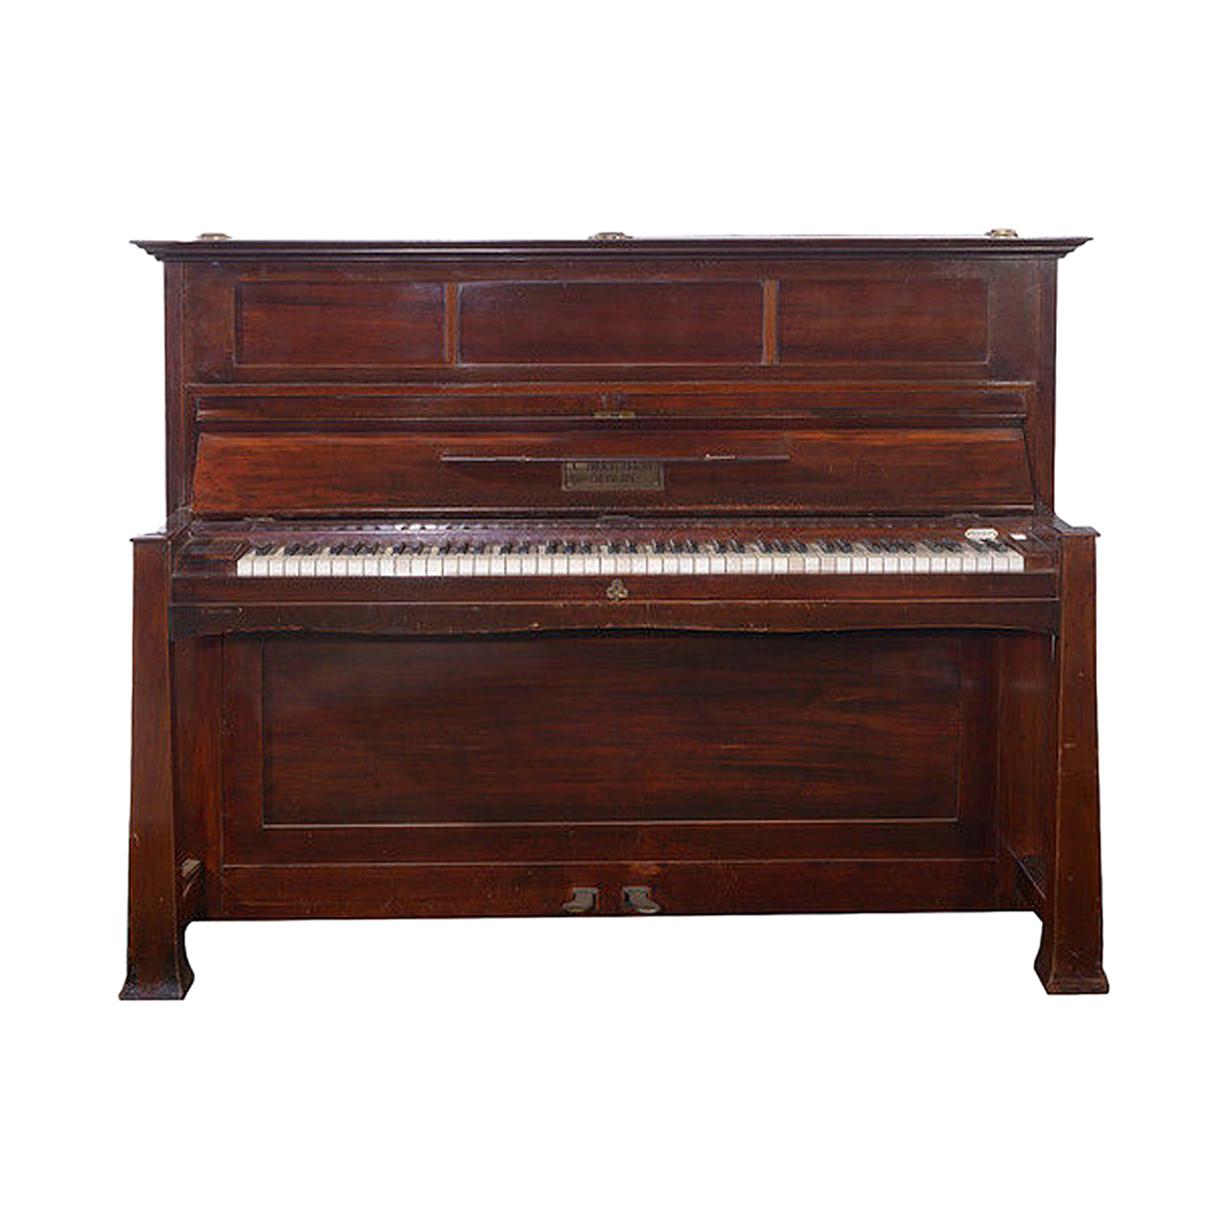 Early 20th Century Upright Piano Manufactured by C. Bechstein For Sale